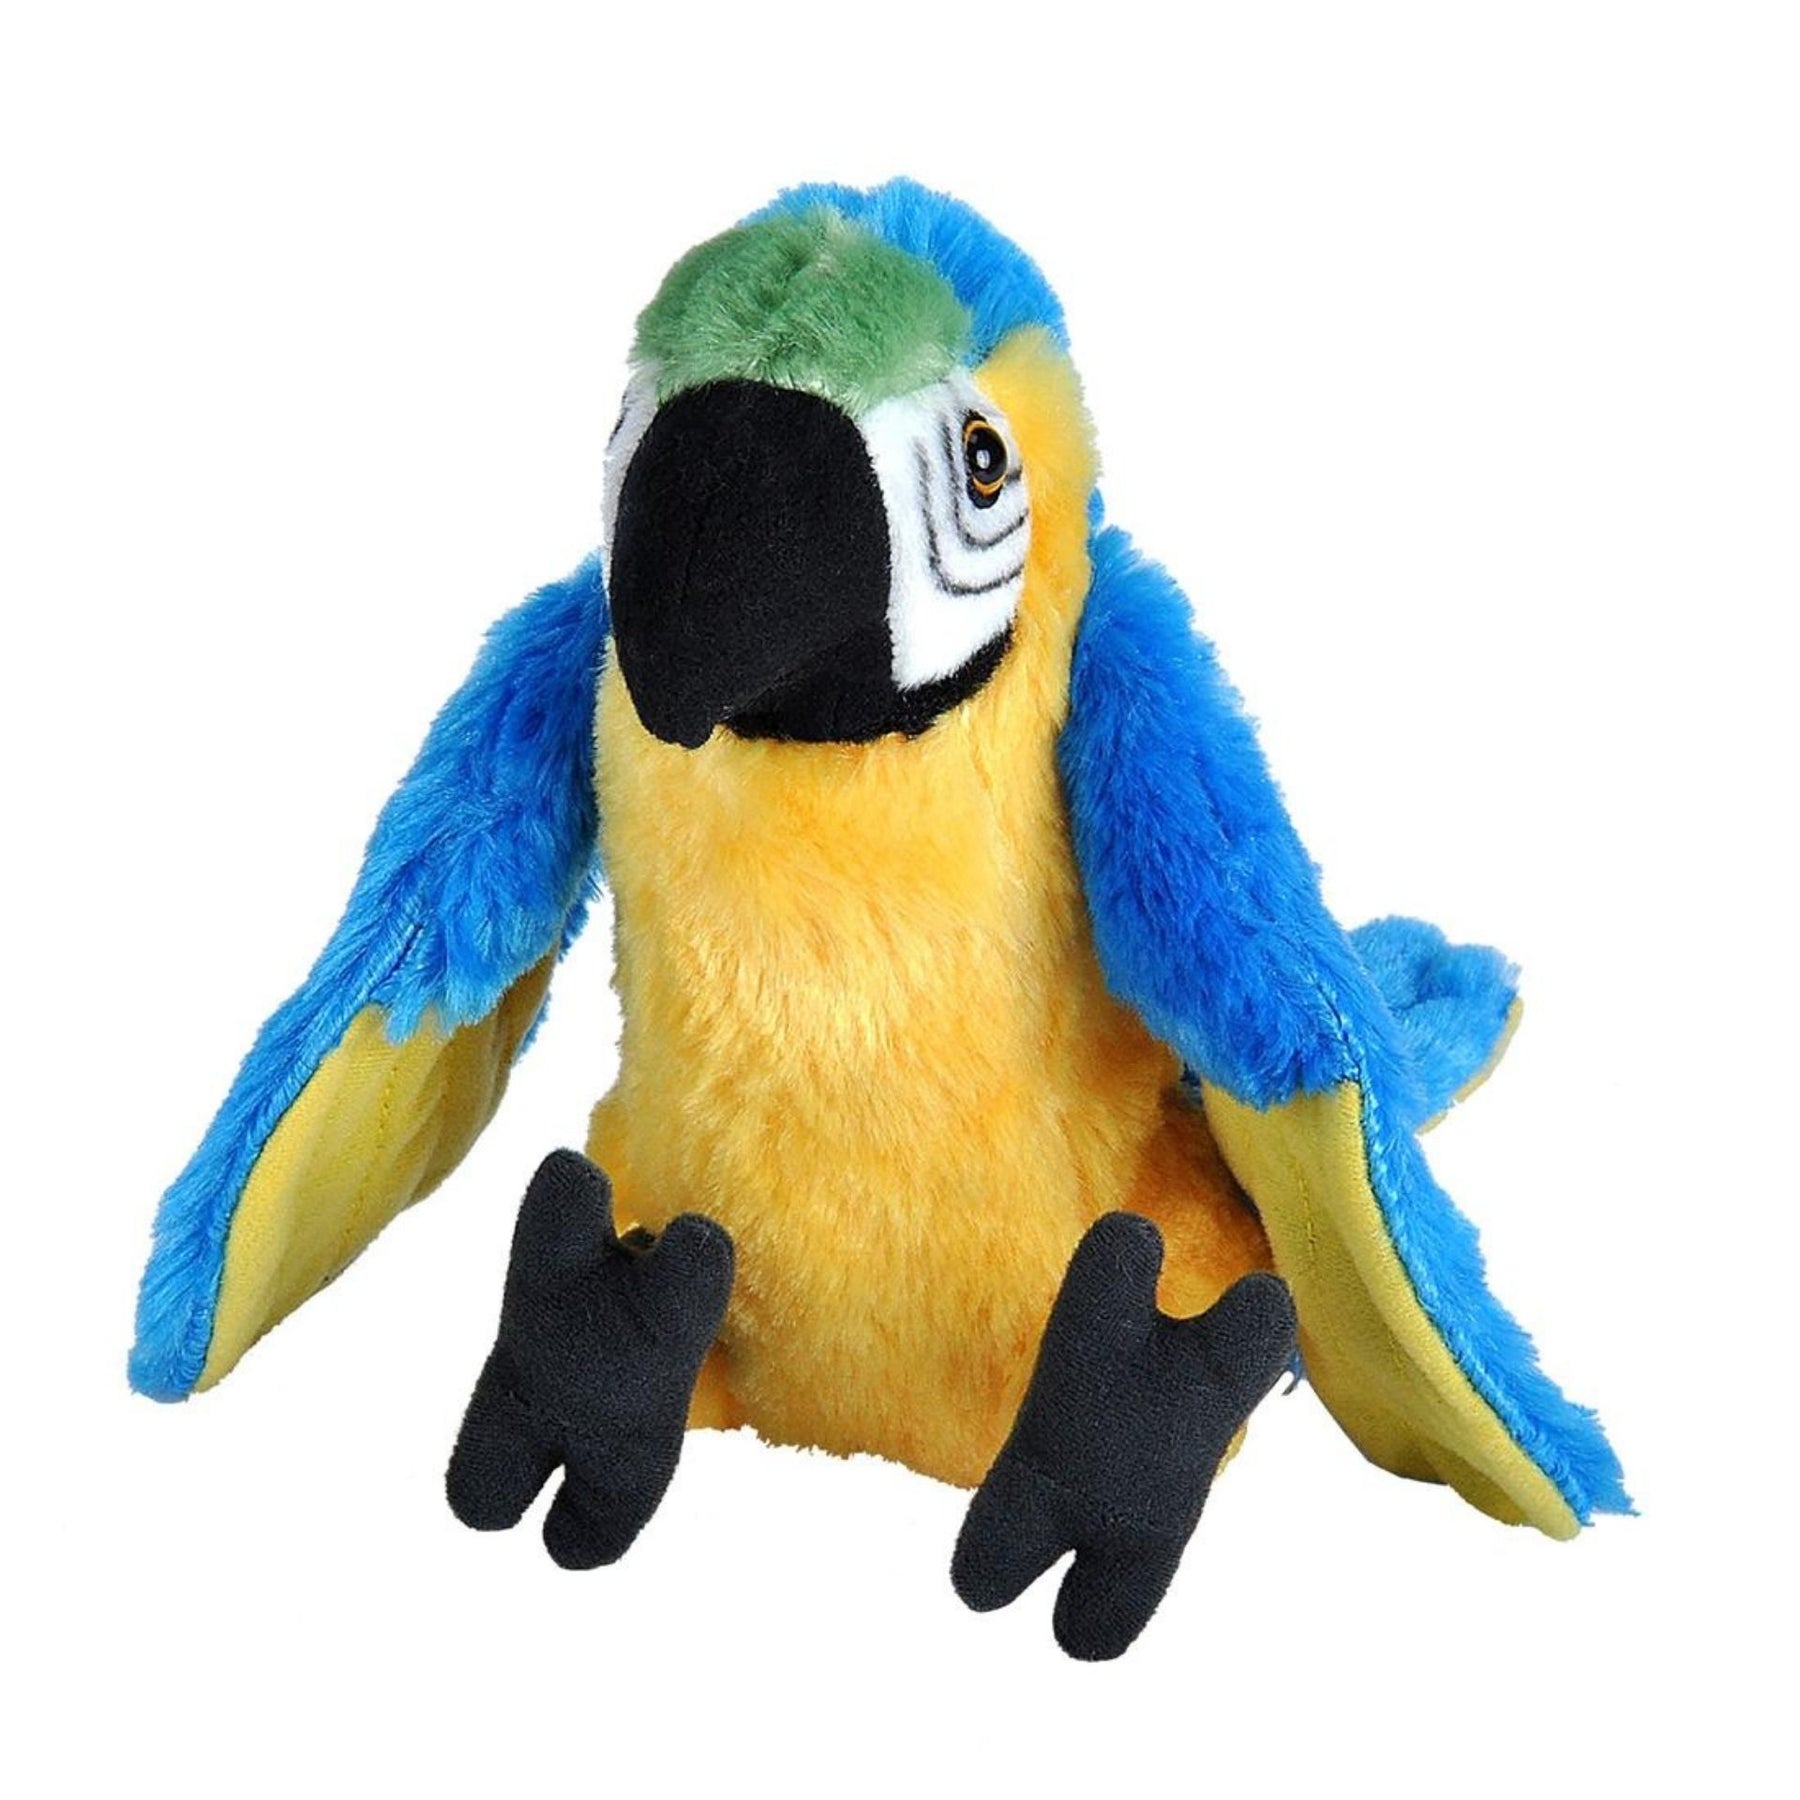 Plush Macaw Parrot Blue & Gold-Southern Agriculture